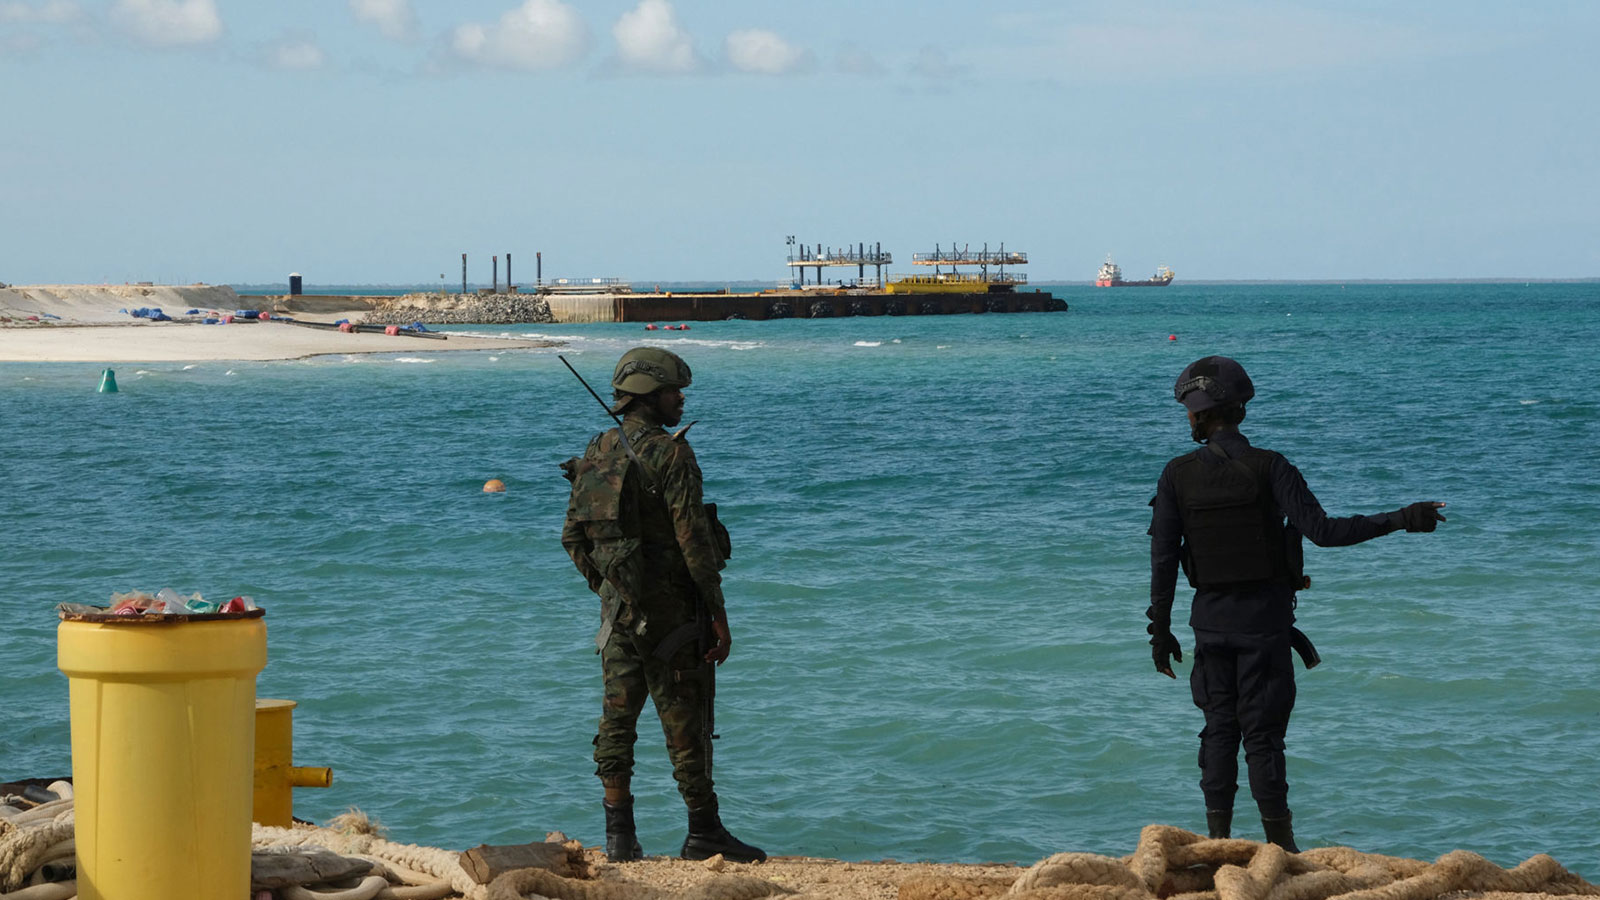 Soldiers guard an LNG project in the conflict-ridden northern province of Cabo Delgado in Mozambique.